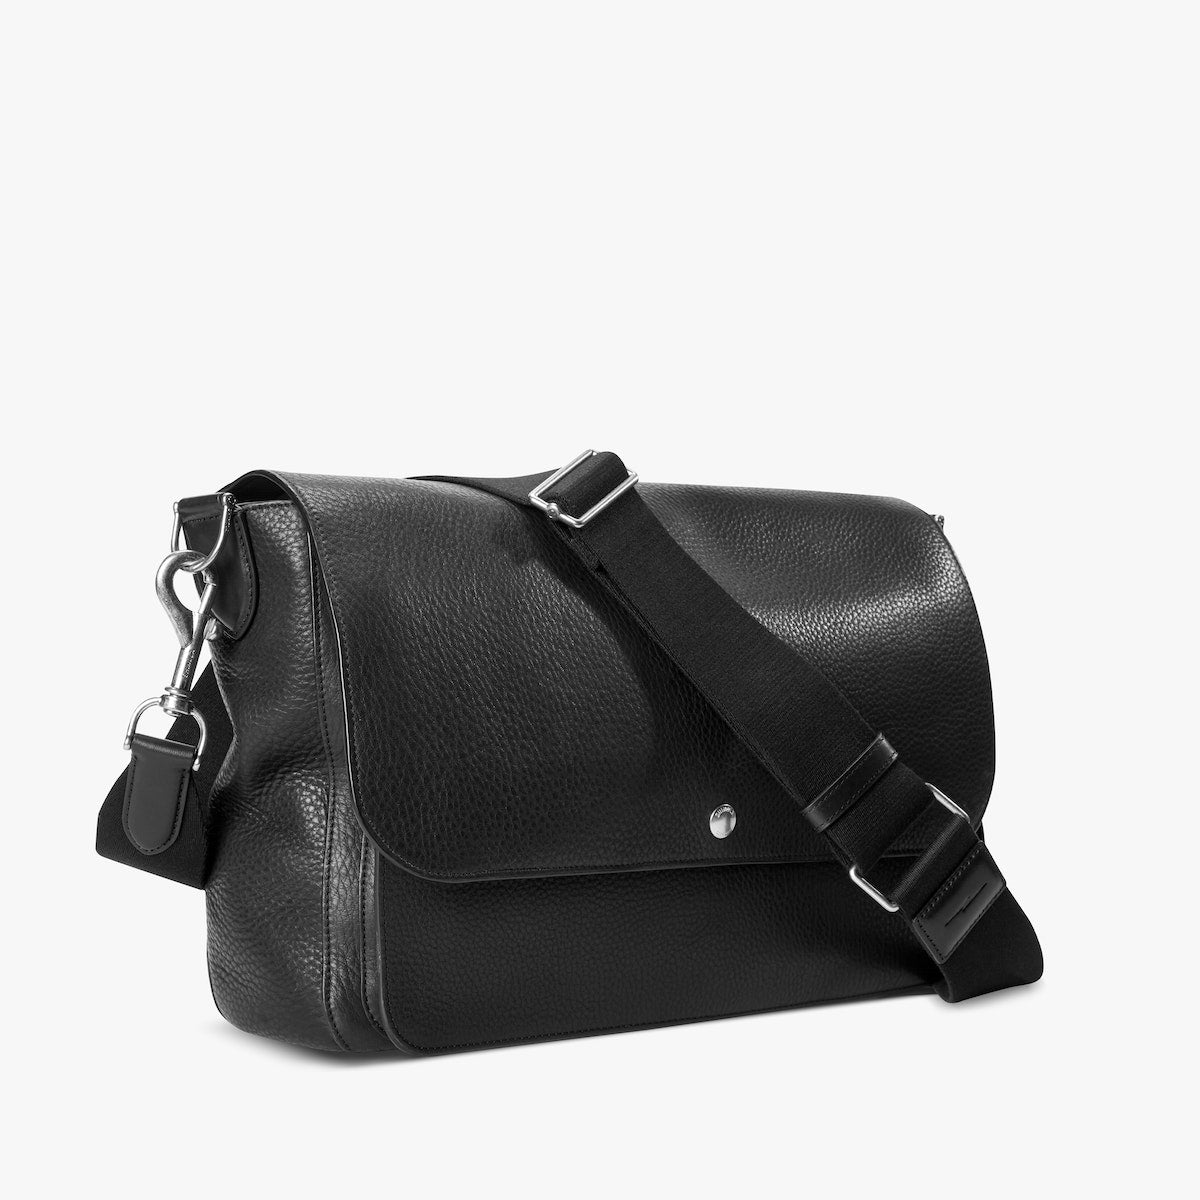 CANFIELD RELAXED MESSENGER - NATURAL GRAIN LEATHER - BLACK